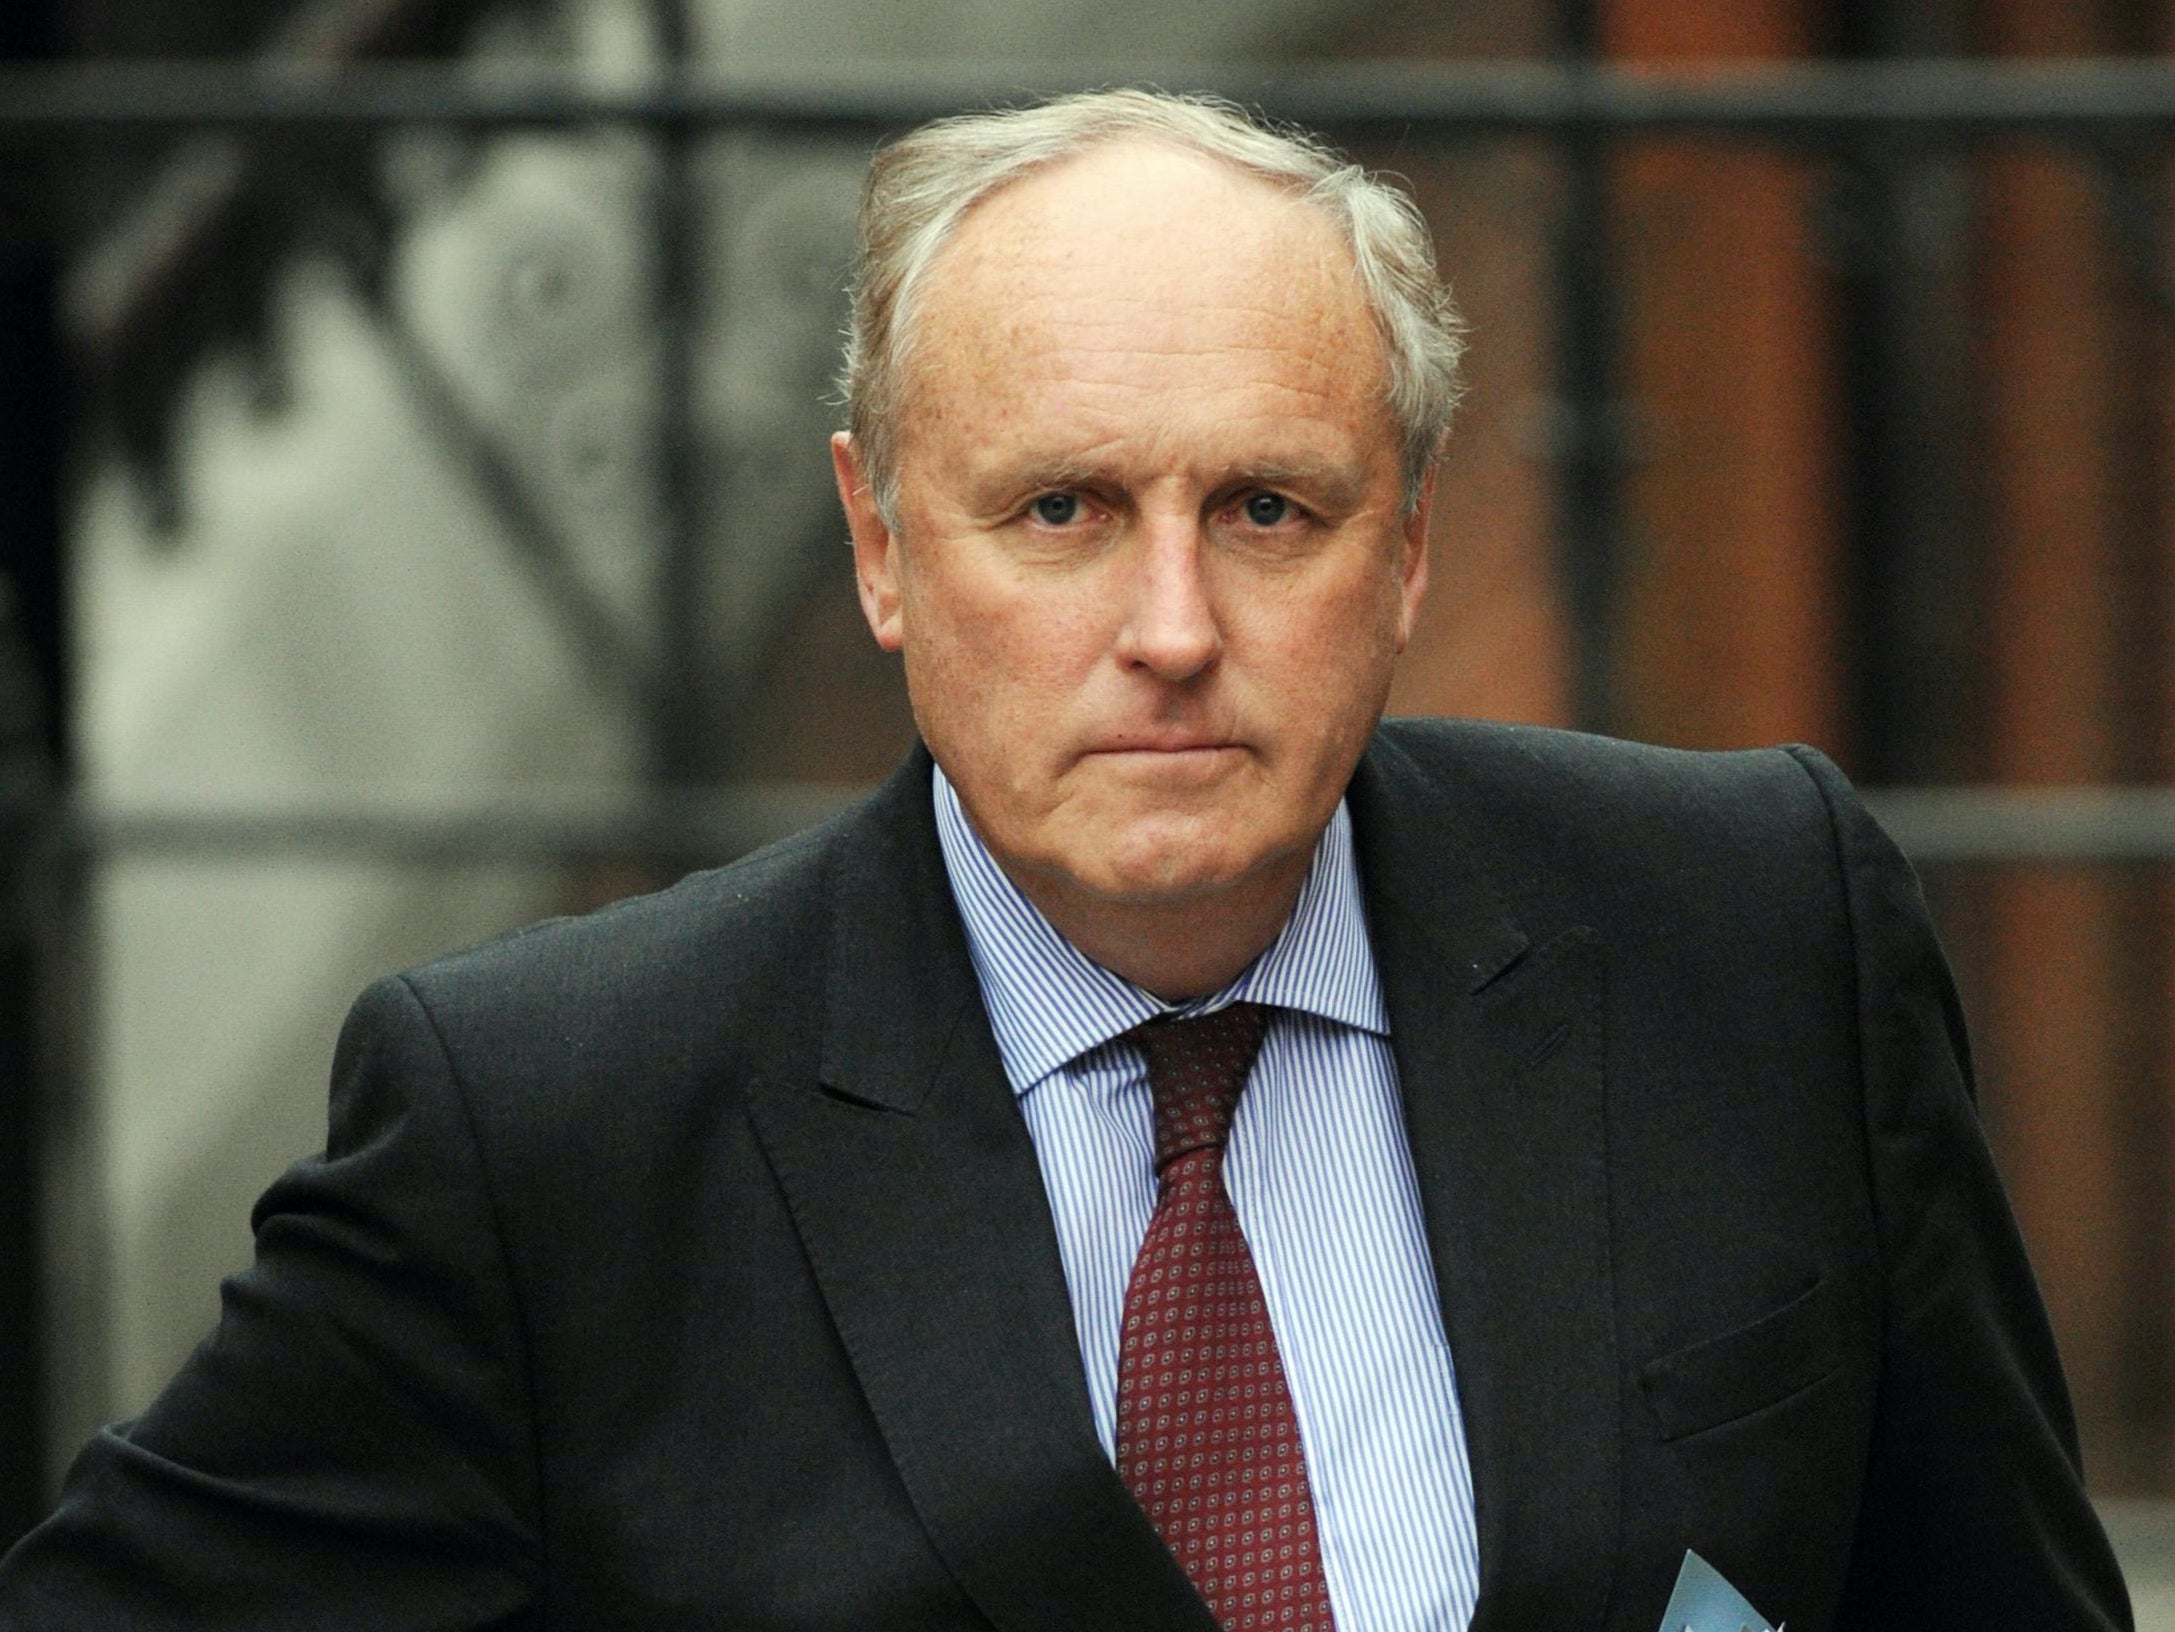 Former Daily Mail editor Paul Dacre